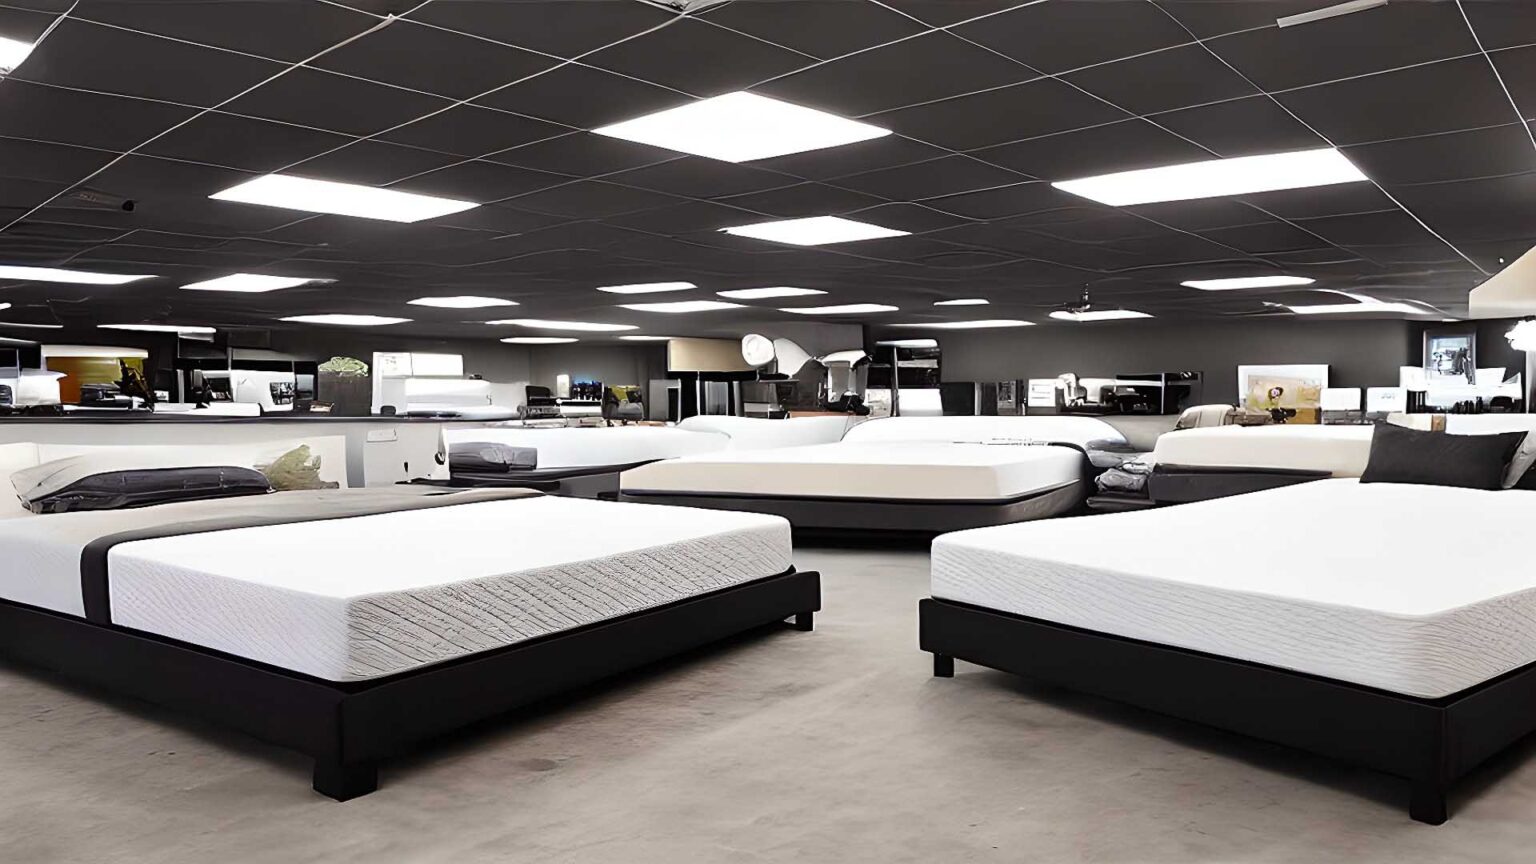 Mattress Stores, mattress dealers, and mattress retailers near me in Columbia, MO